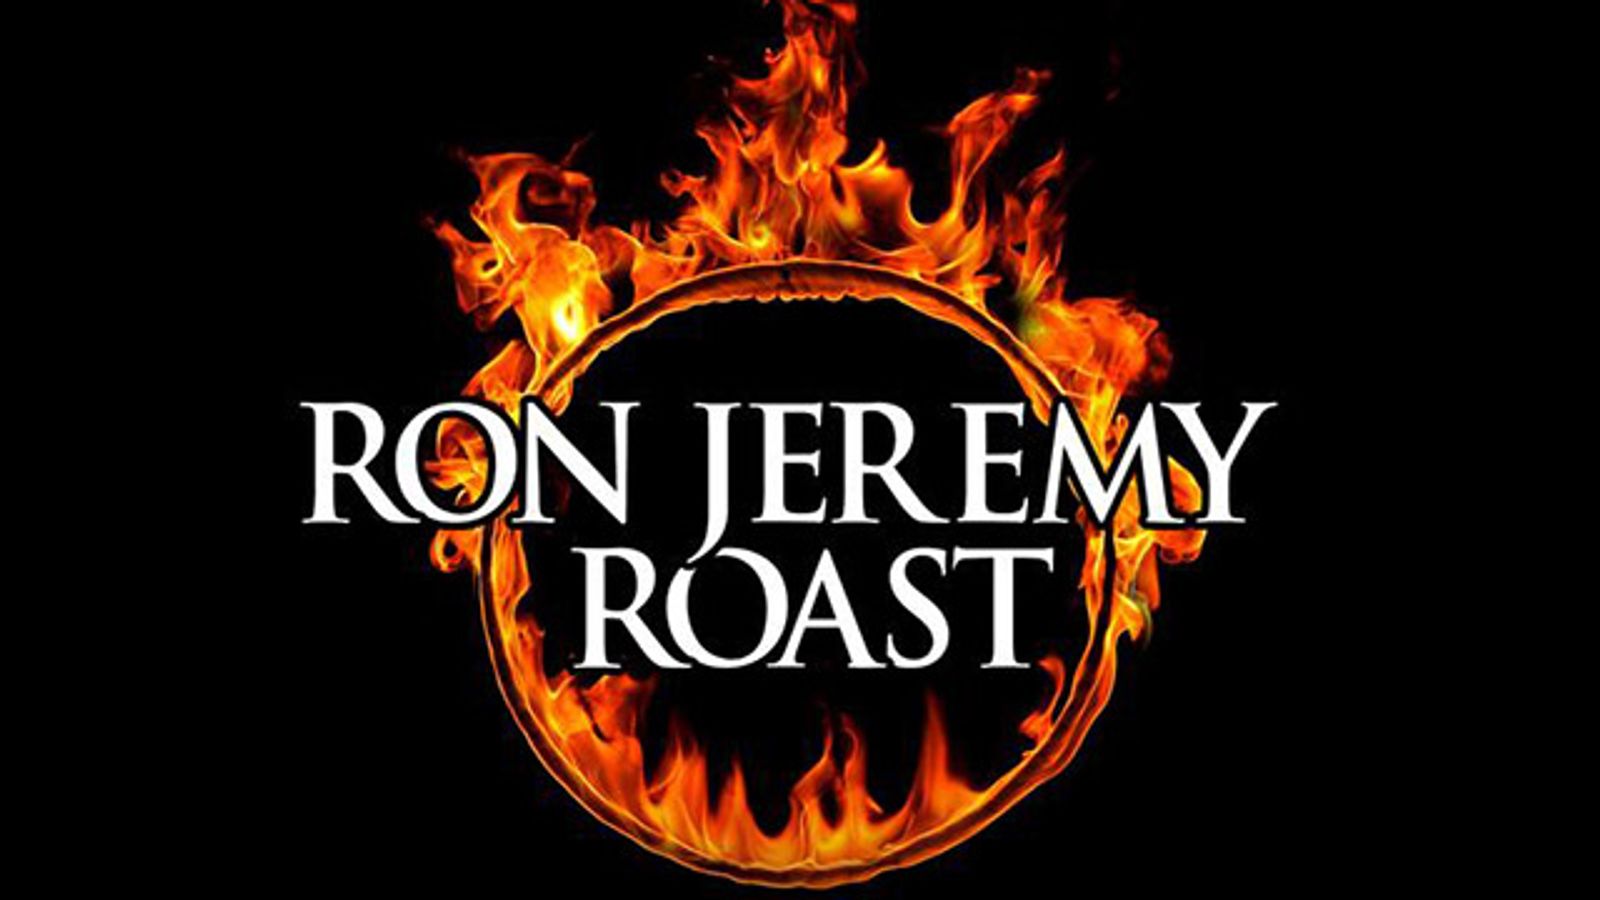 Ron Jeremy Roast To Be Available Online This Summer